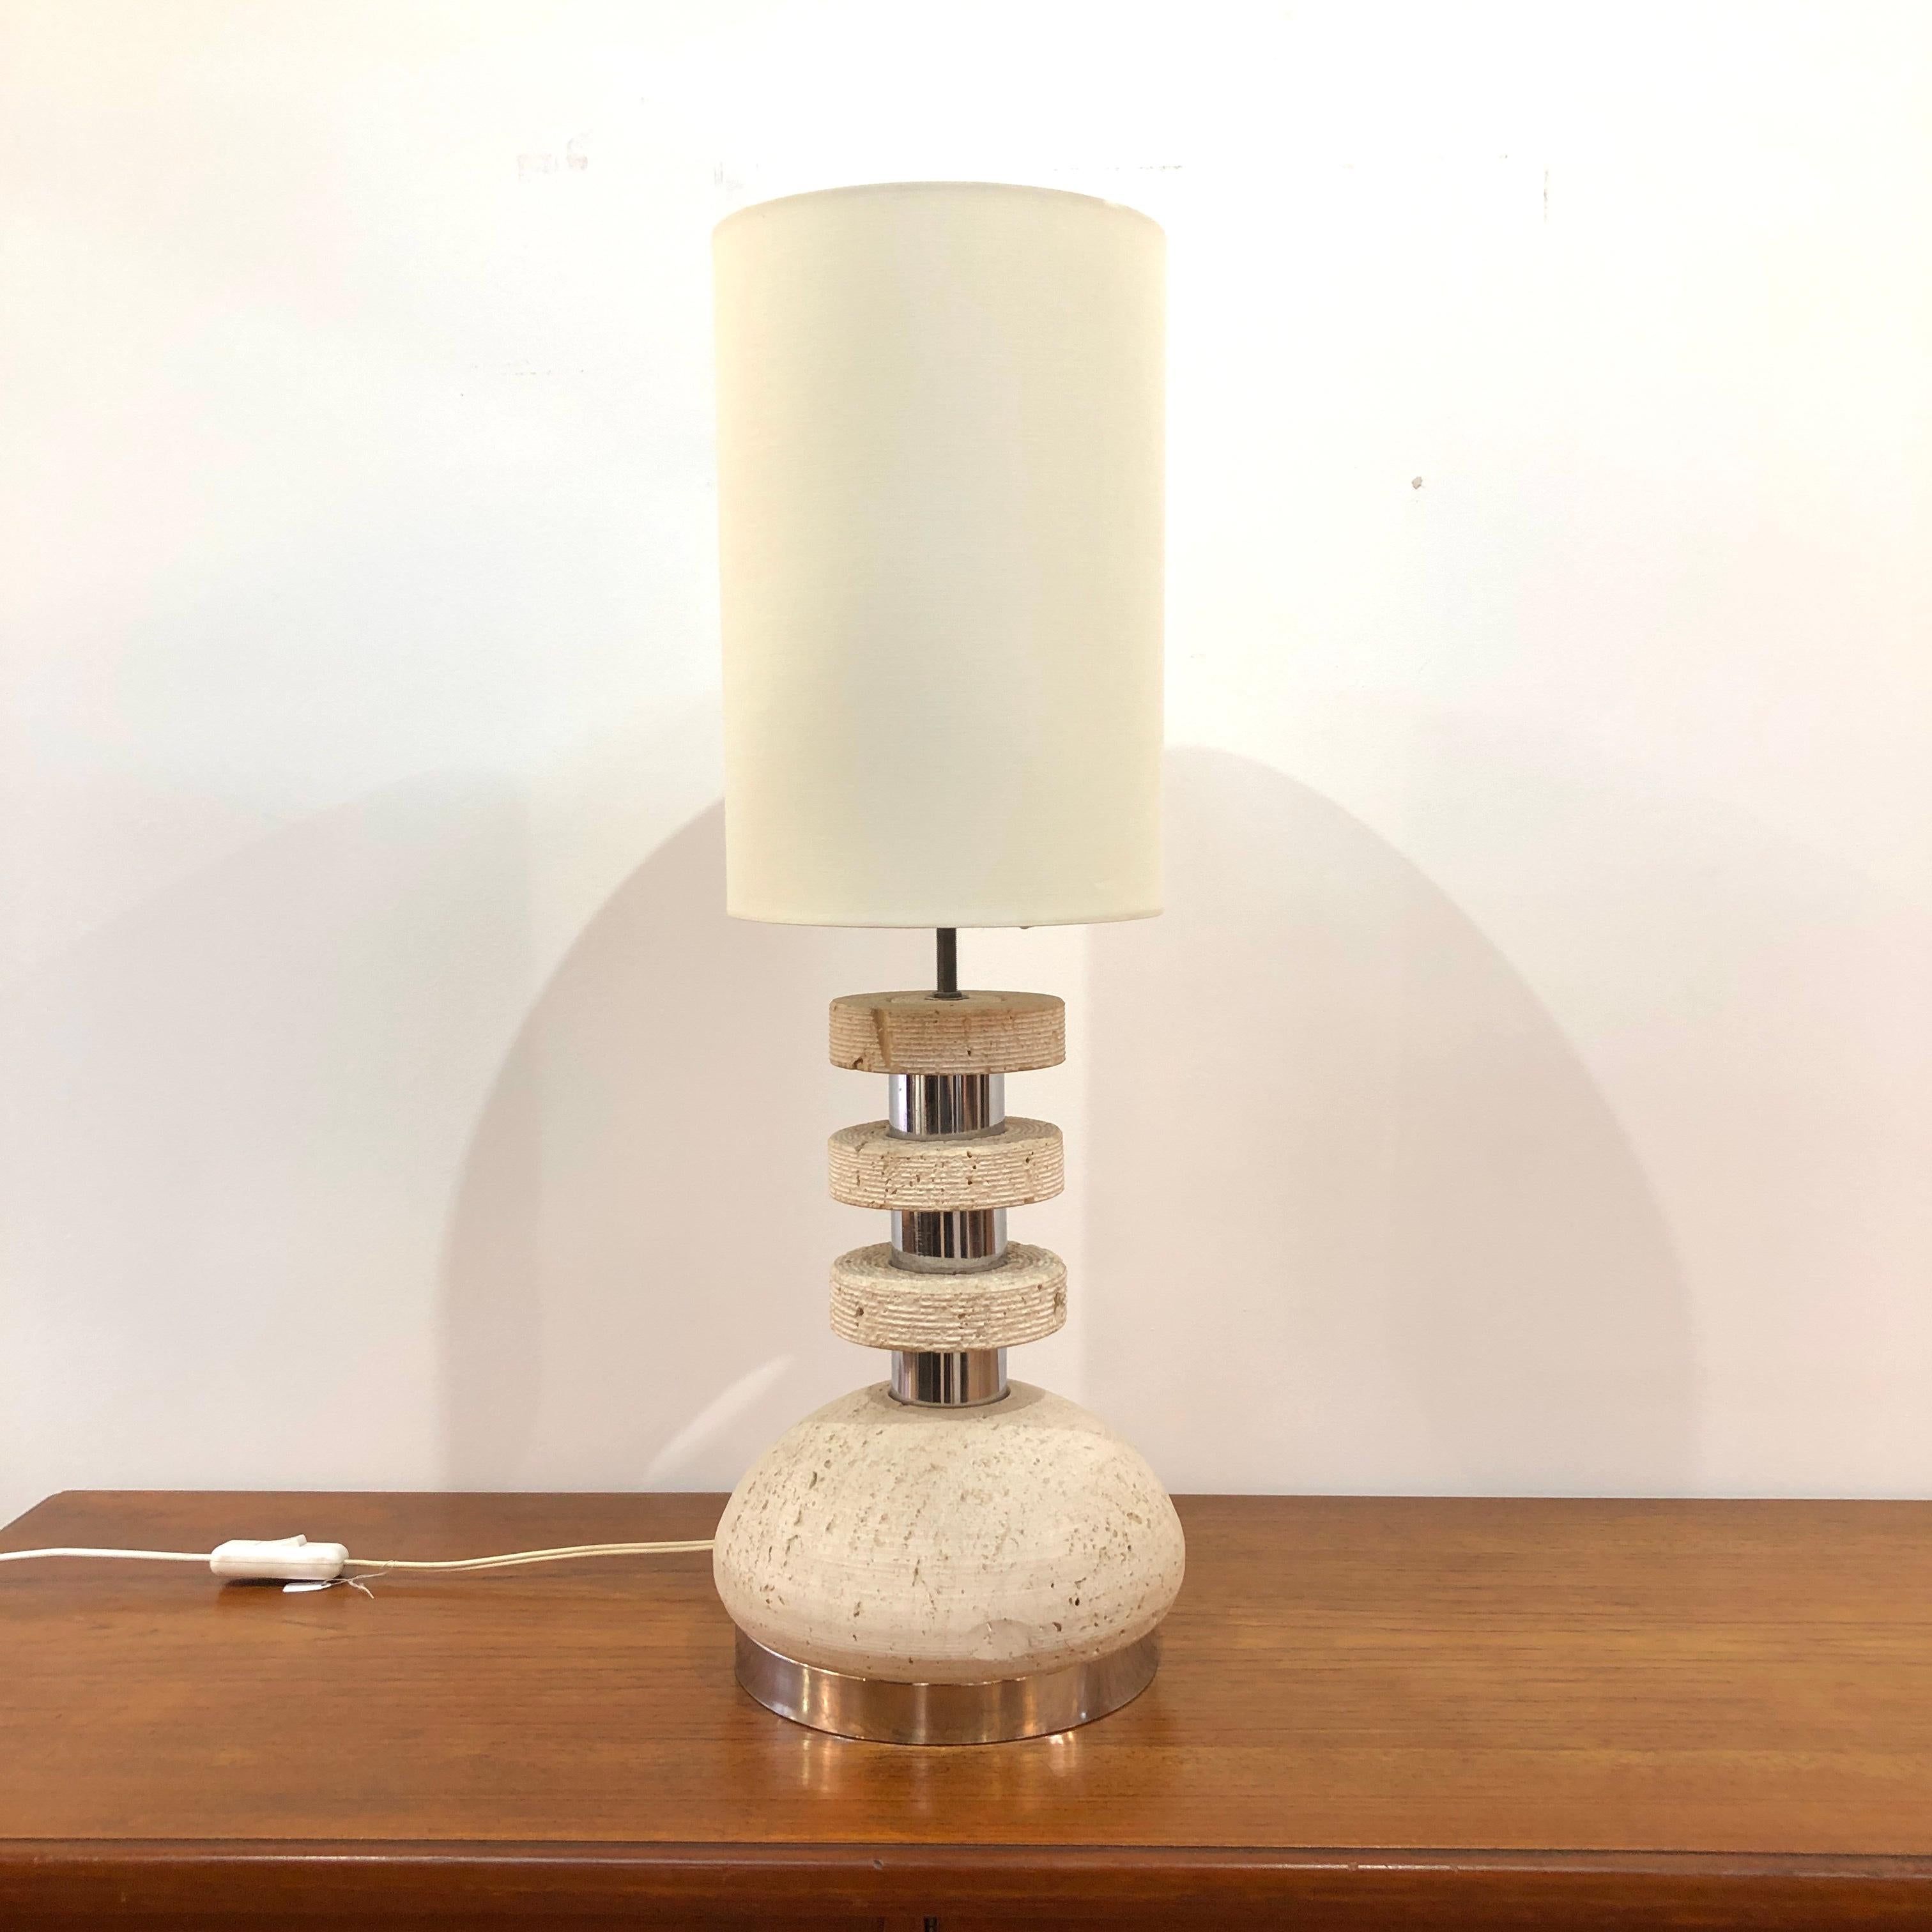 Travertine and Chrome lamp attributed to Italian sculpter Emanuele Scarnicci. A very pleasing contrast of materials with a freshly made shade. 

Please feel free to contact us for more information/photos.